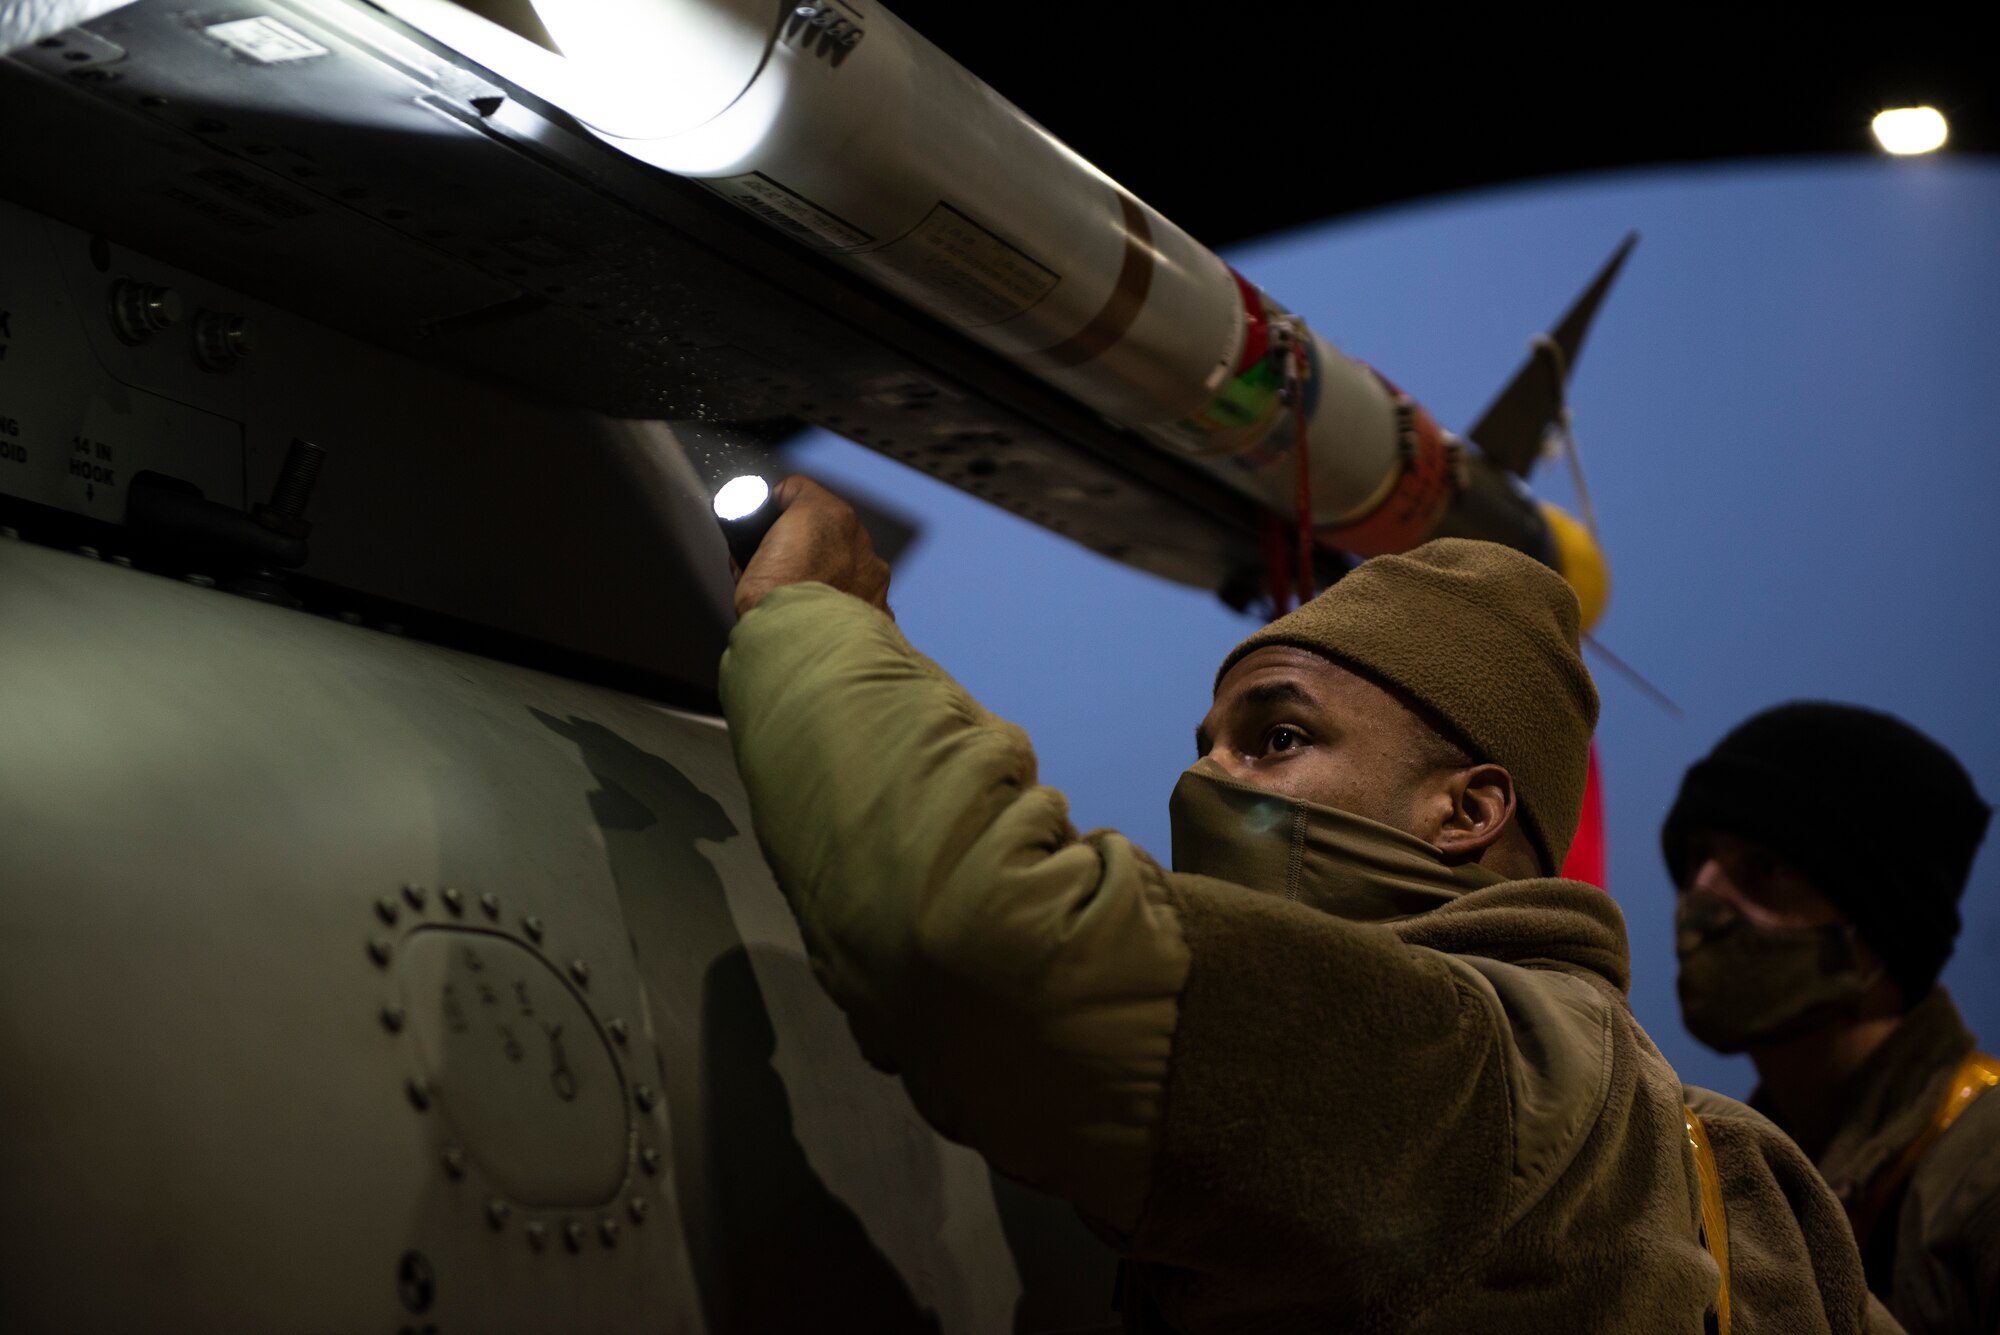 U.S. Air Force Staff Sgt. Shelton Thigpen, 748th Aircraft Maintenance Squadron weapons team chief, inspects a NATM-9M missile after loading it to the aircraft at Royal Air Force Lakenheath, England, Dec. 8, 2020. Airmen from the 48th MUNS converted the AIM-9M missiles to NATM-9M, or Special Air Training Missiles, for employment from the F-15 aircraft. (U.S. Air Force photo by Airman 1st Class Jessi Monte)